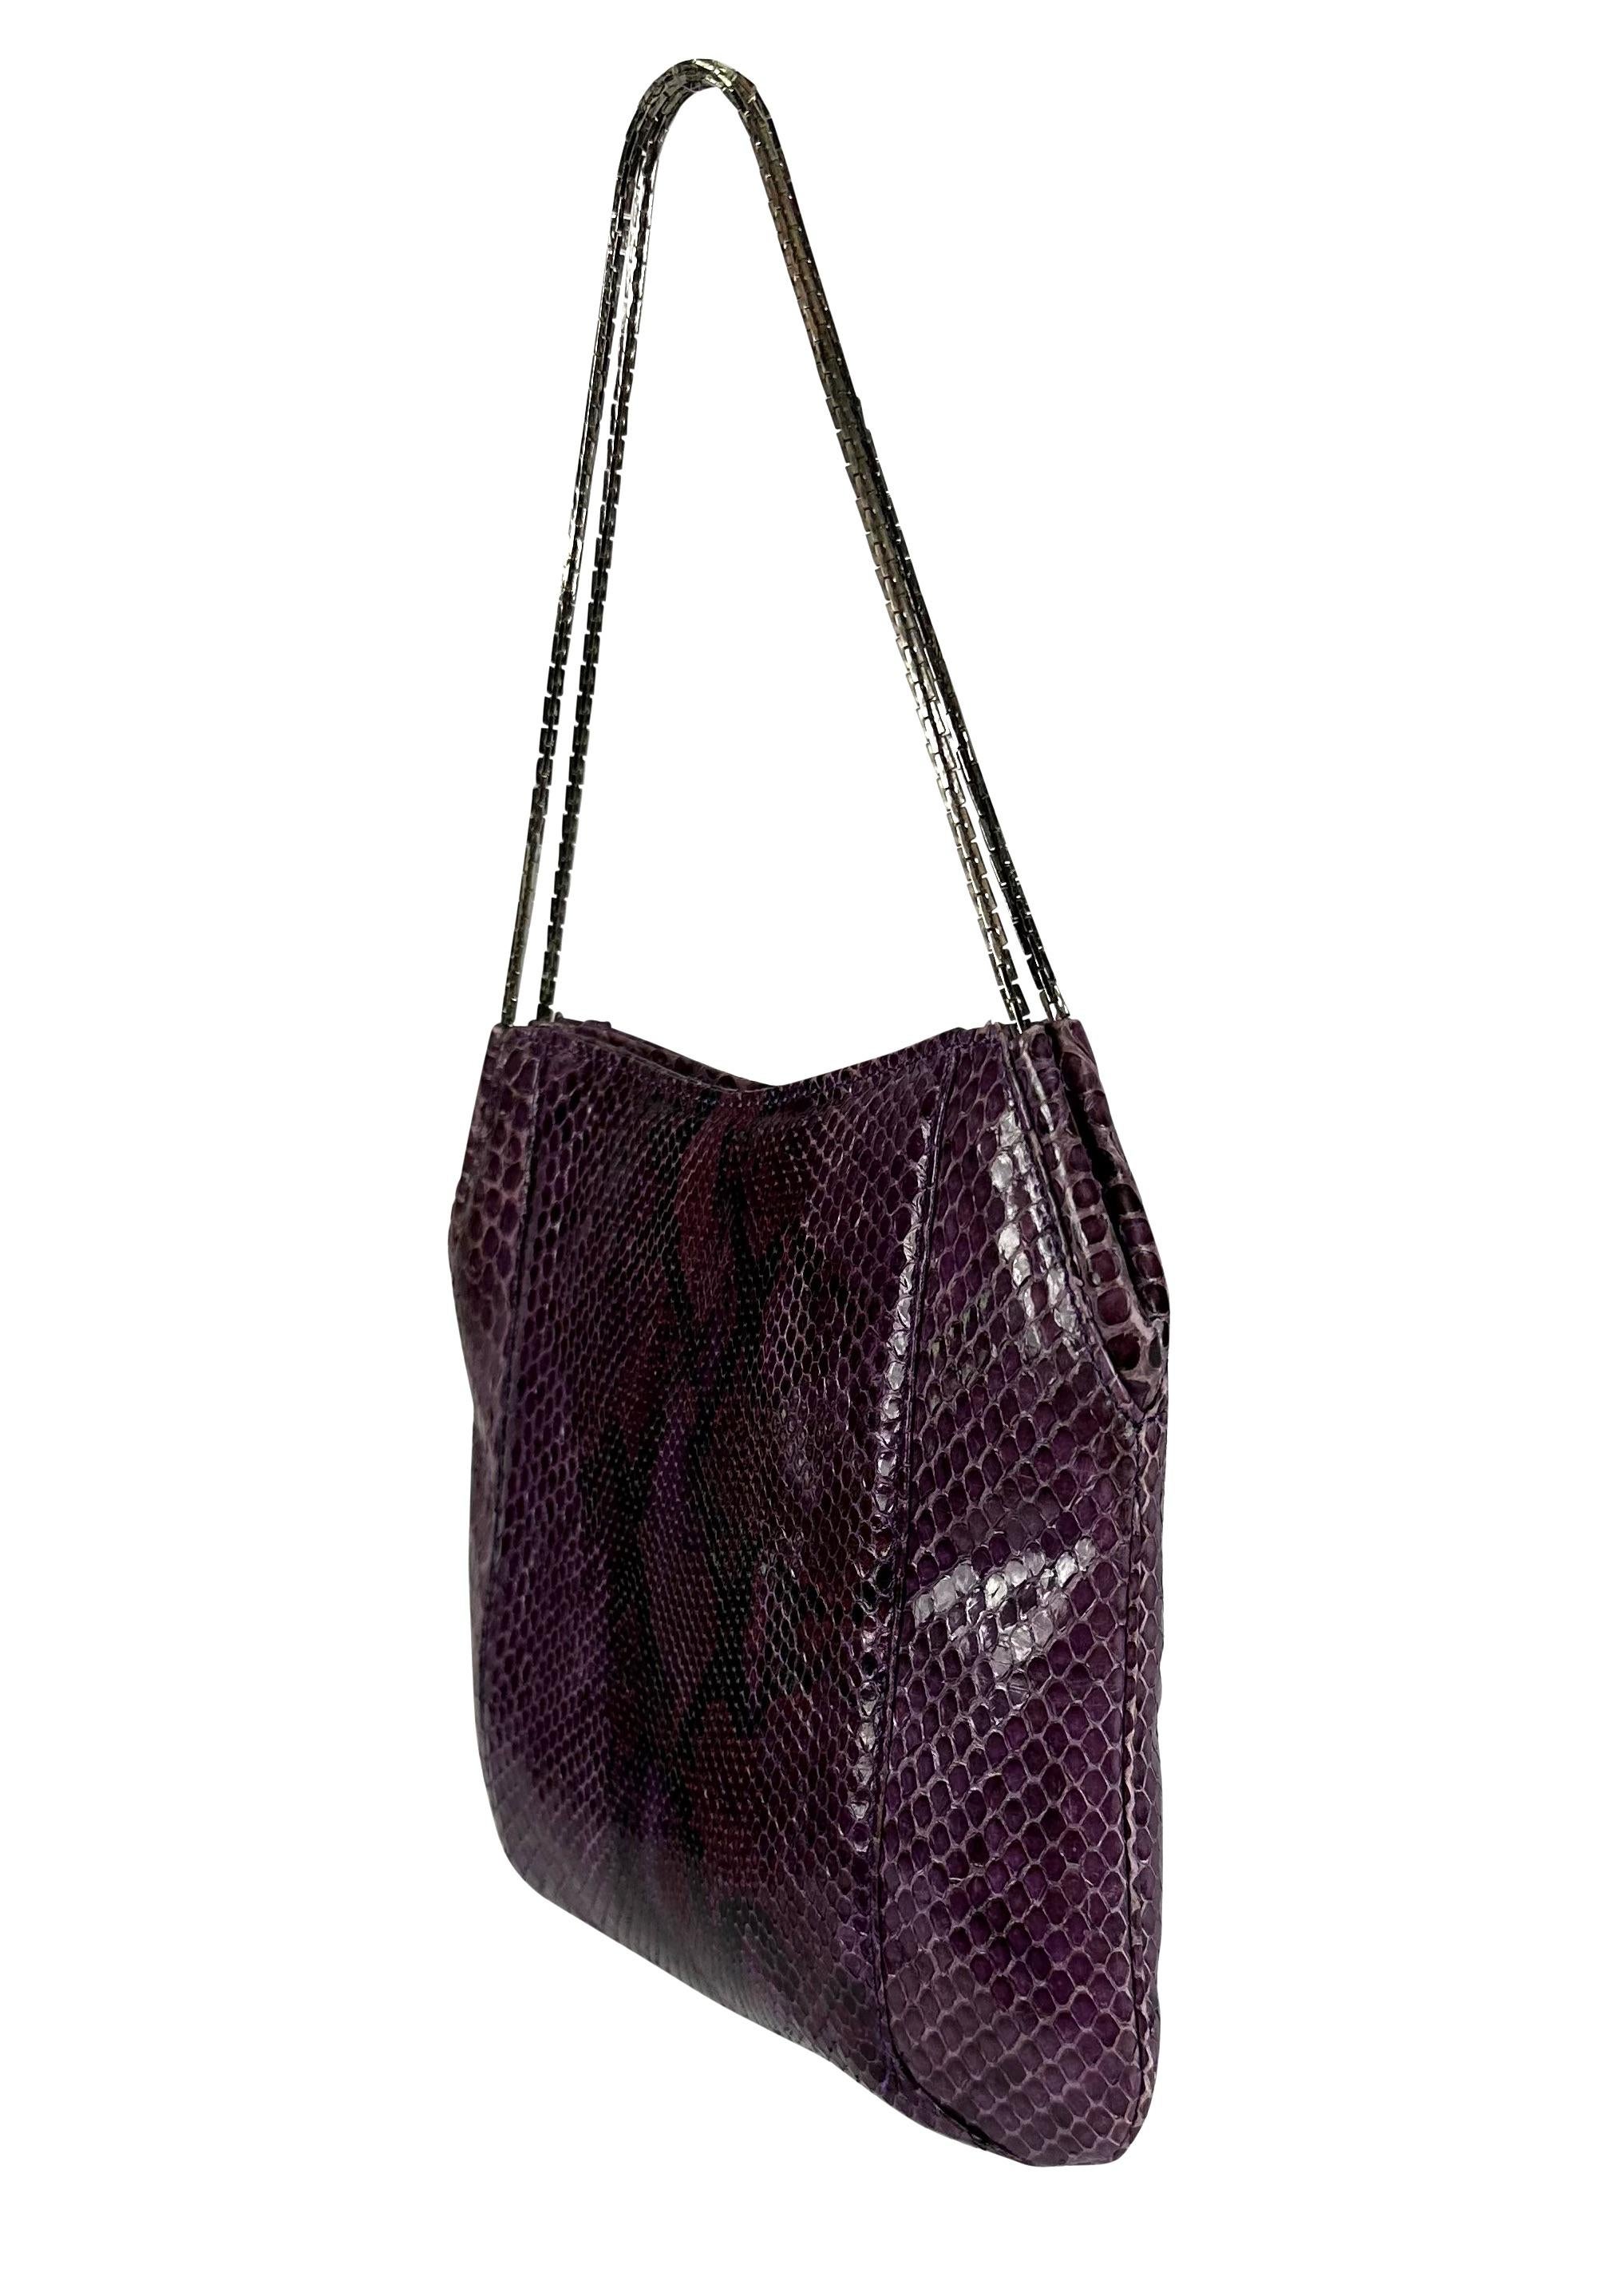 Presenting an incredible purple python Gianni Versace mini bag, designed by Donatella Versace. From the Fall/Winter 1999 collection, this bag is constructed of purple python and is made complete with a silver-tone chain handle. 

Approximate